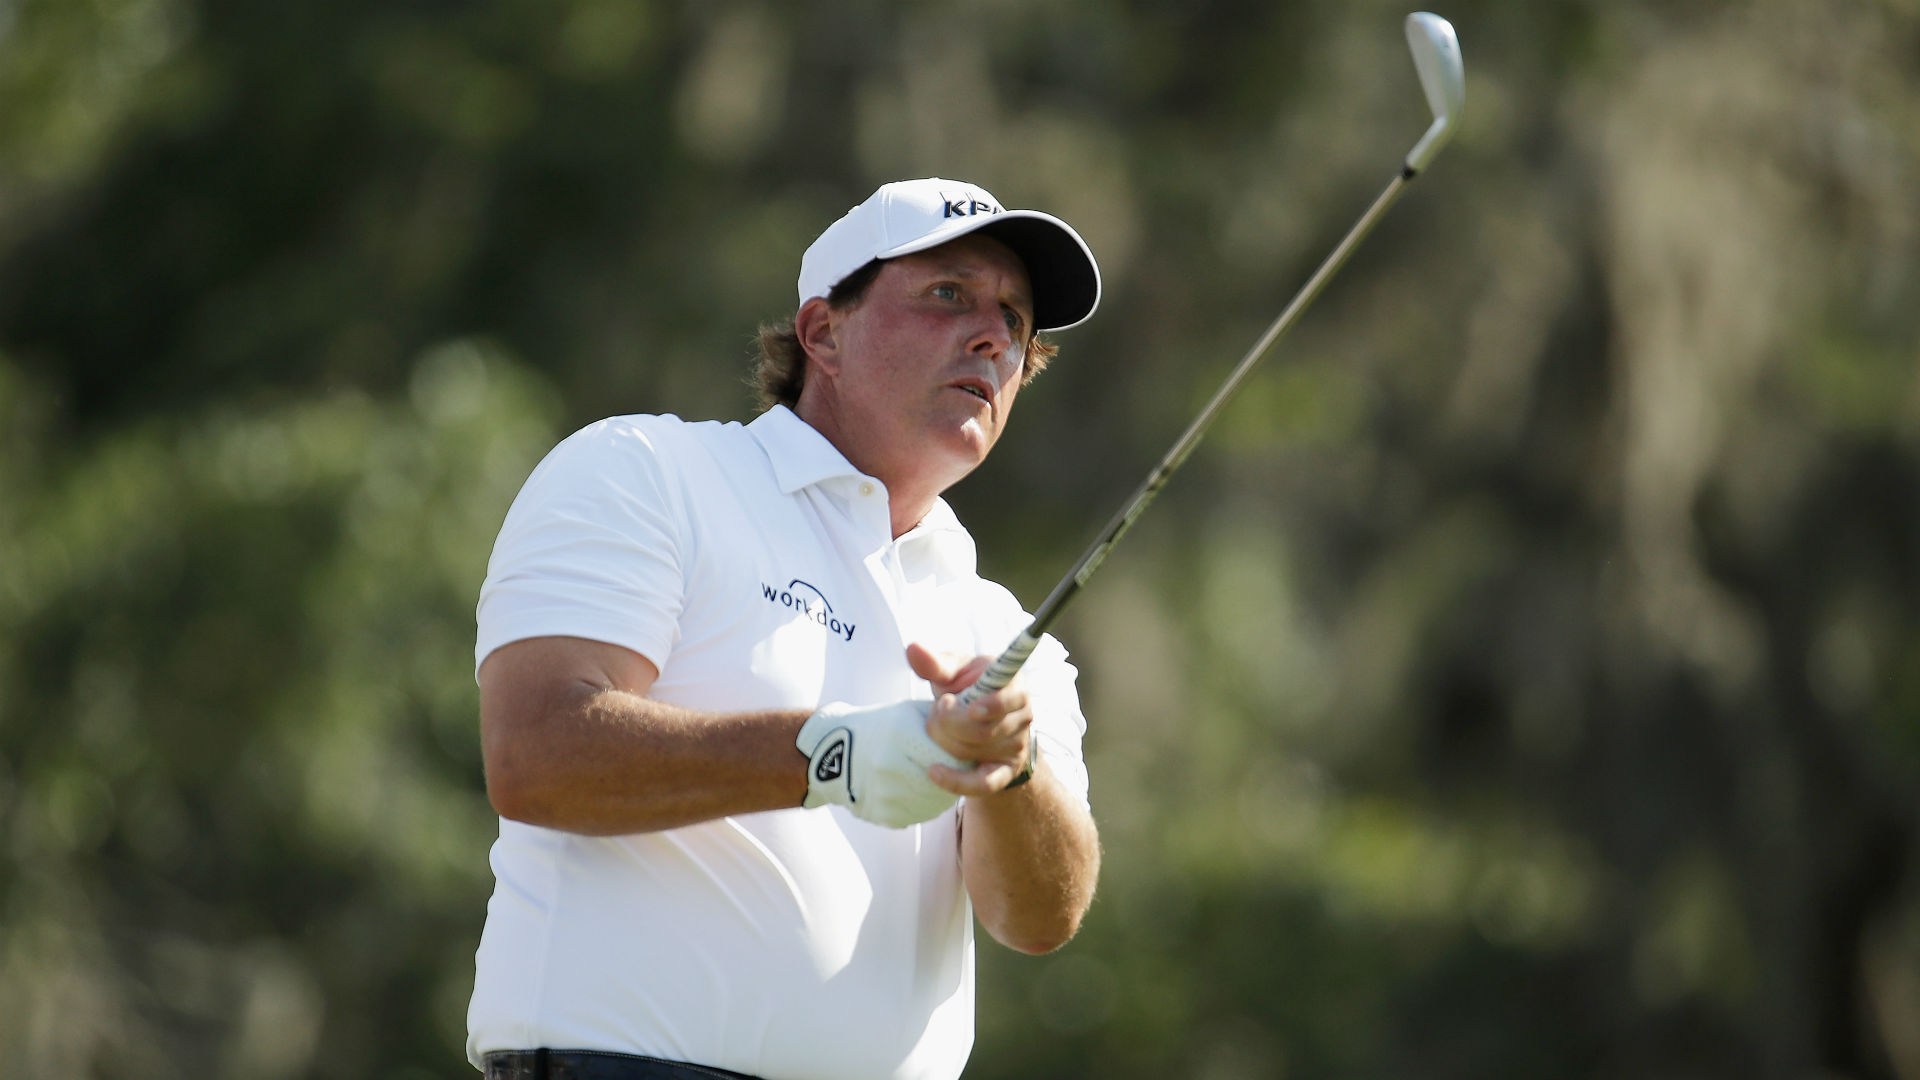 Players Championship: Phil Mickelson predicts major changes to leaderboard over weekend - Sporting News